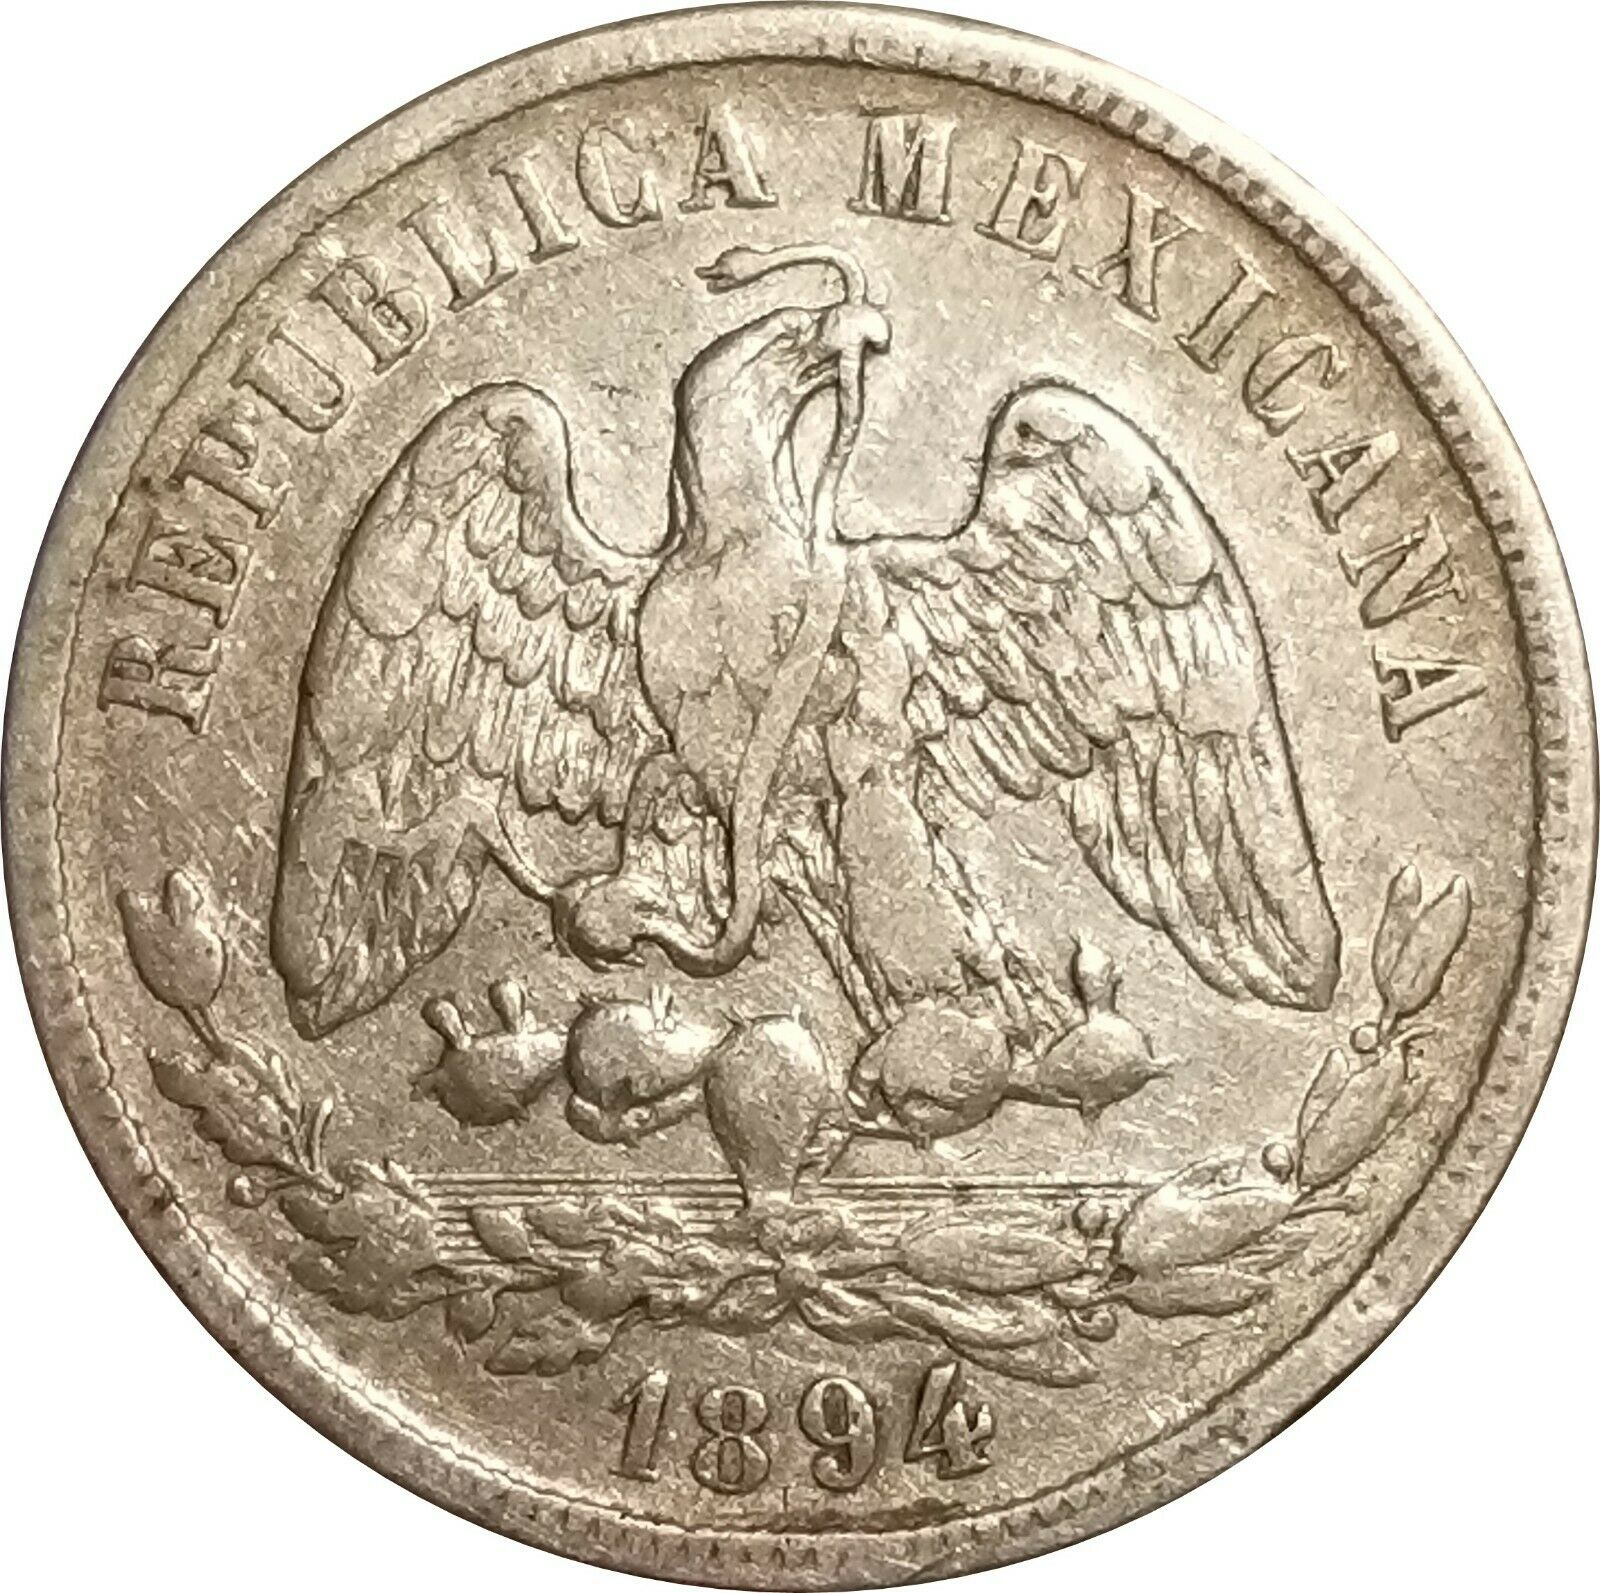 1894 Mexico Silver 50 Centavos, Ho.g., Hermosillo Mint, Only 59,000 Struck, Xf